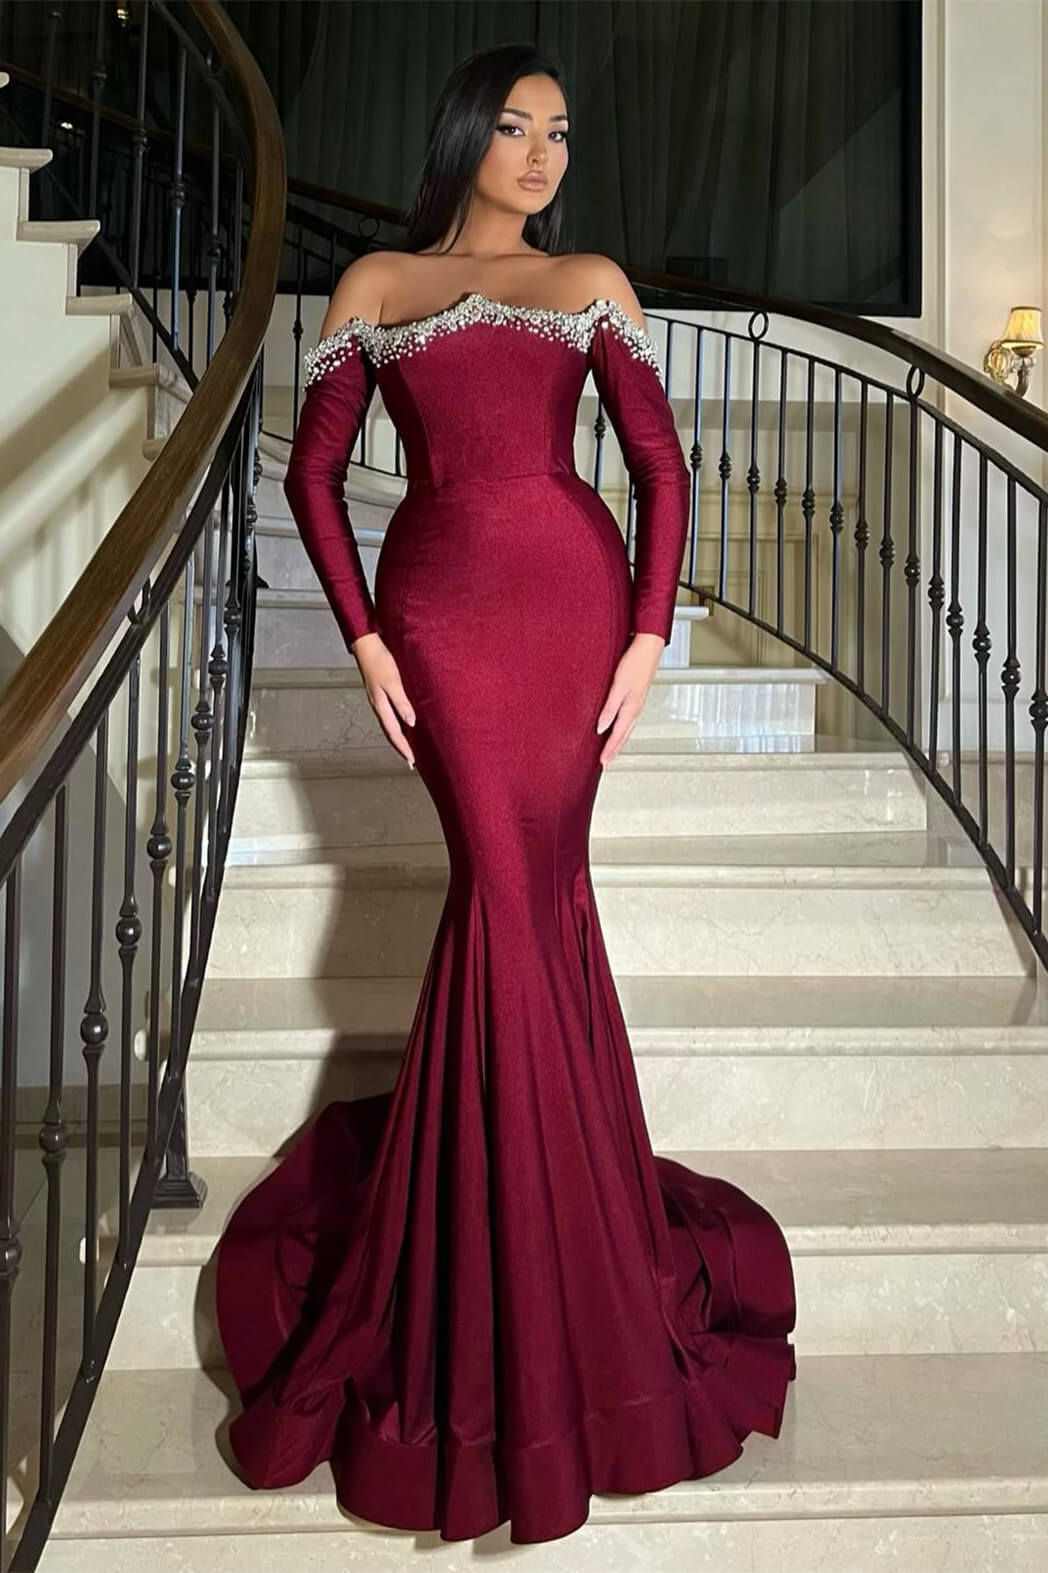 Chic Burgundy Long Sleeves Mermaid Evening Gown With Beads - lulusllly